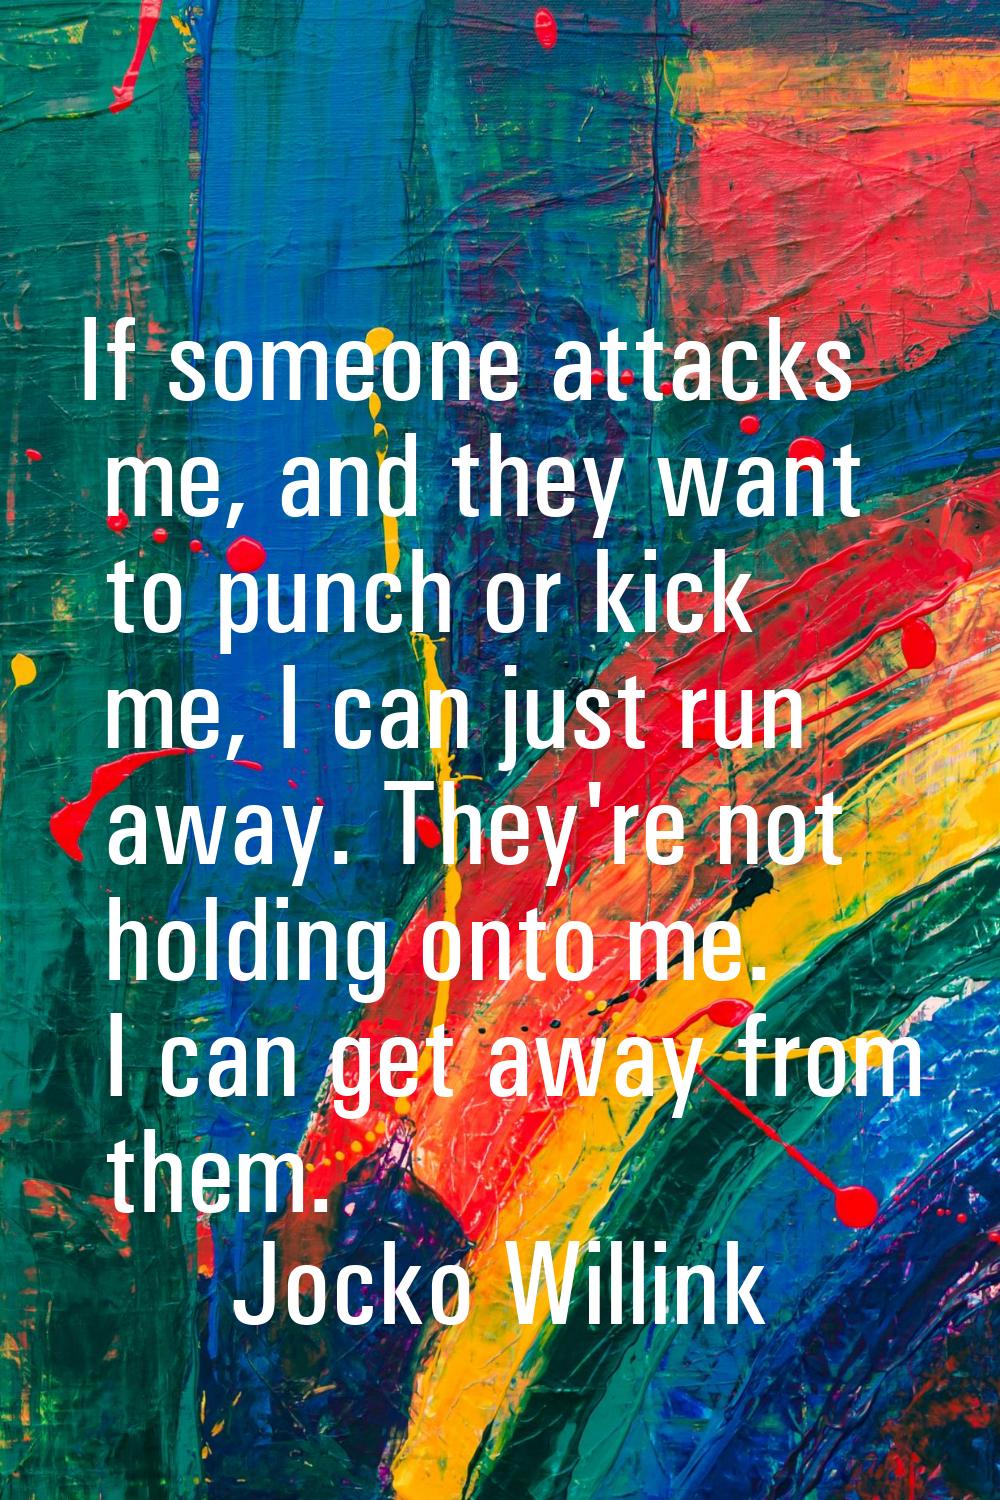 If someone attacks me, and they want to punch or kick me, I can just run away. They're not holding 